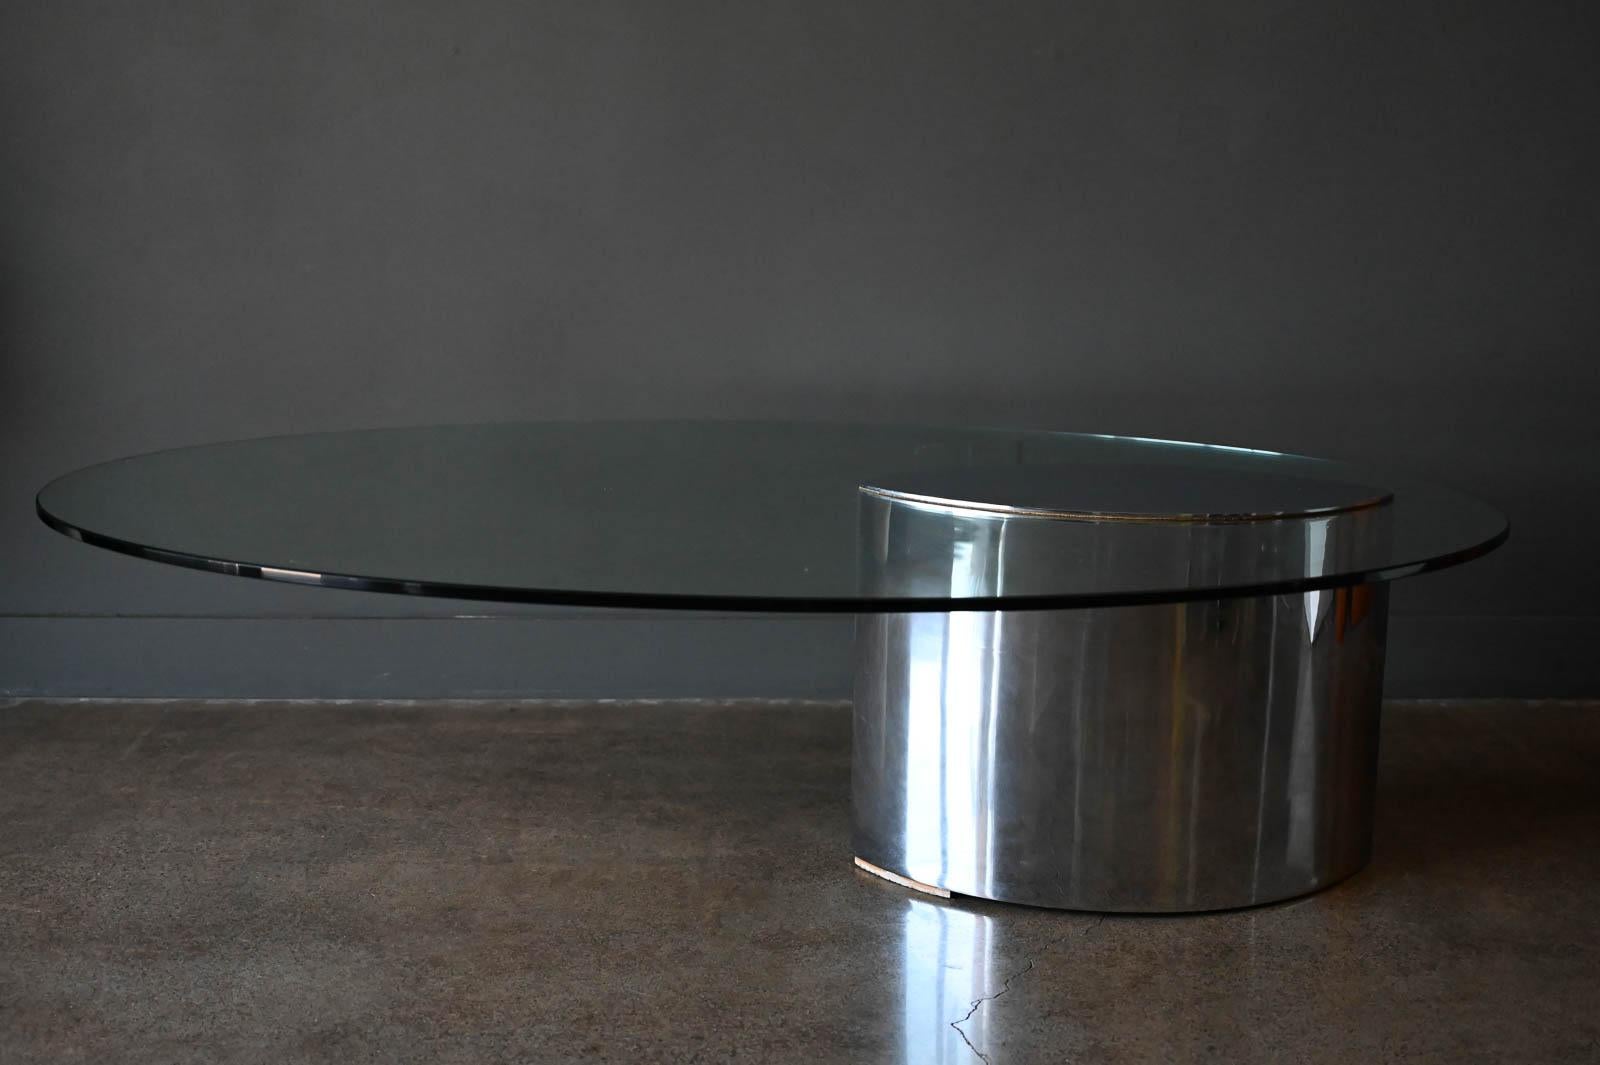 Vintage Cini Boeri for Knoll Lunario Oval  Cantelivered glass and chrome coffee table, circa 1970. Original condition, very good overall. Glass is free of chips or cracking. Chrome base is solid and clean.

Measures 60